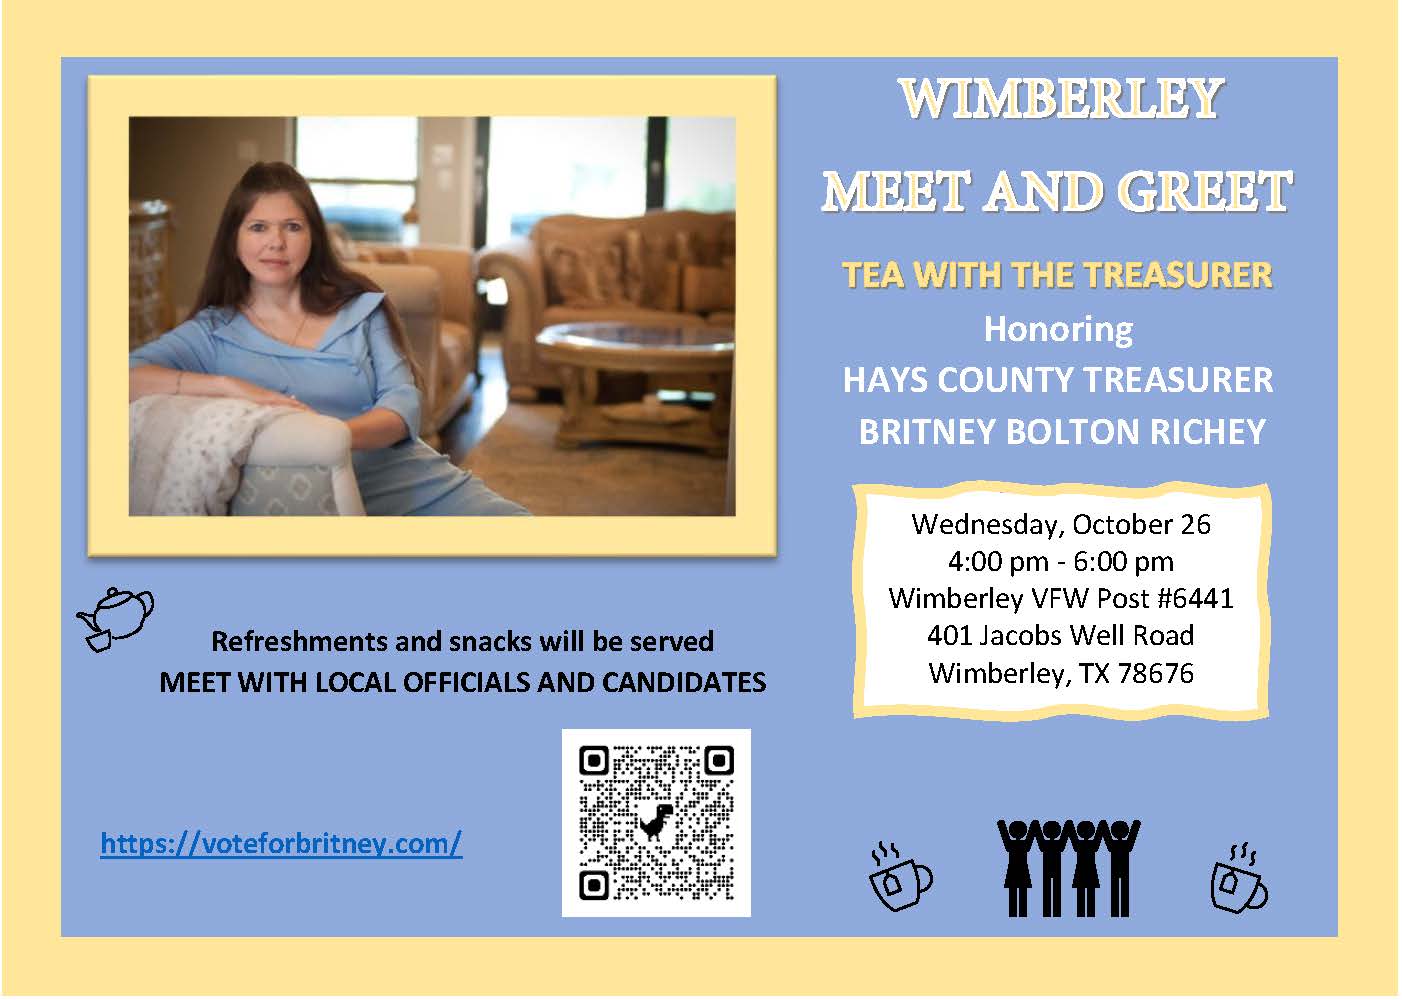 Tea with the Treasurer: Meet & Greet with Britney Bolton Richey